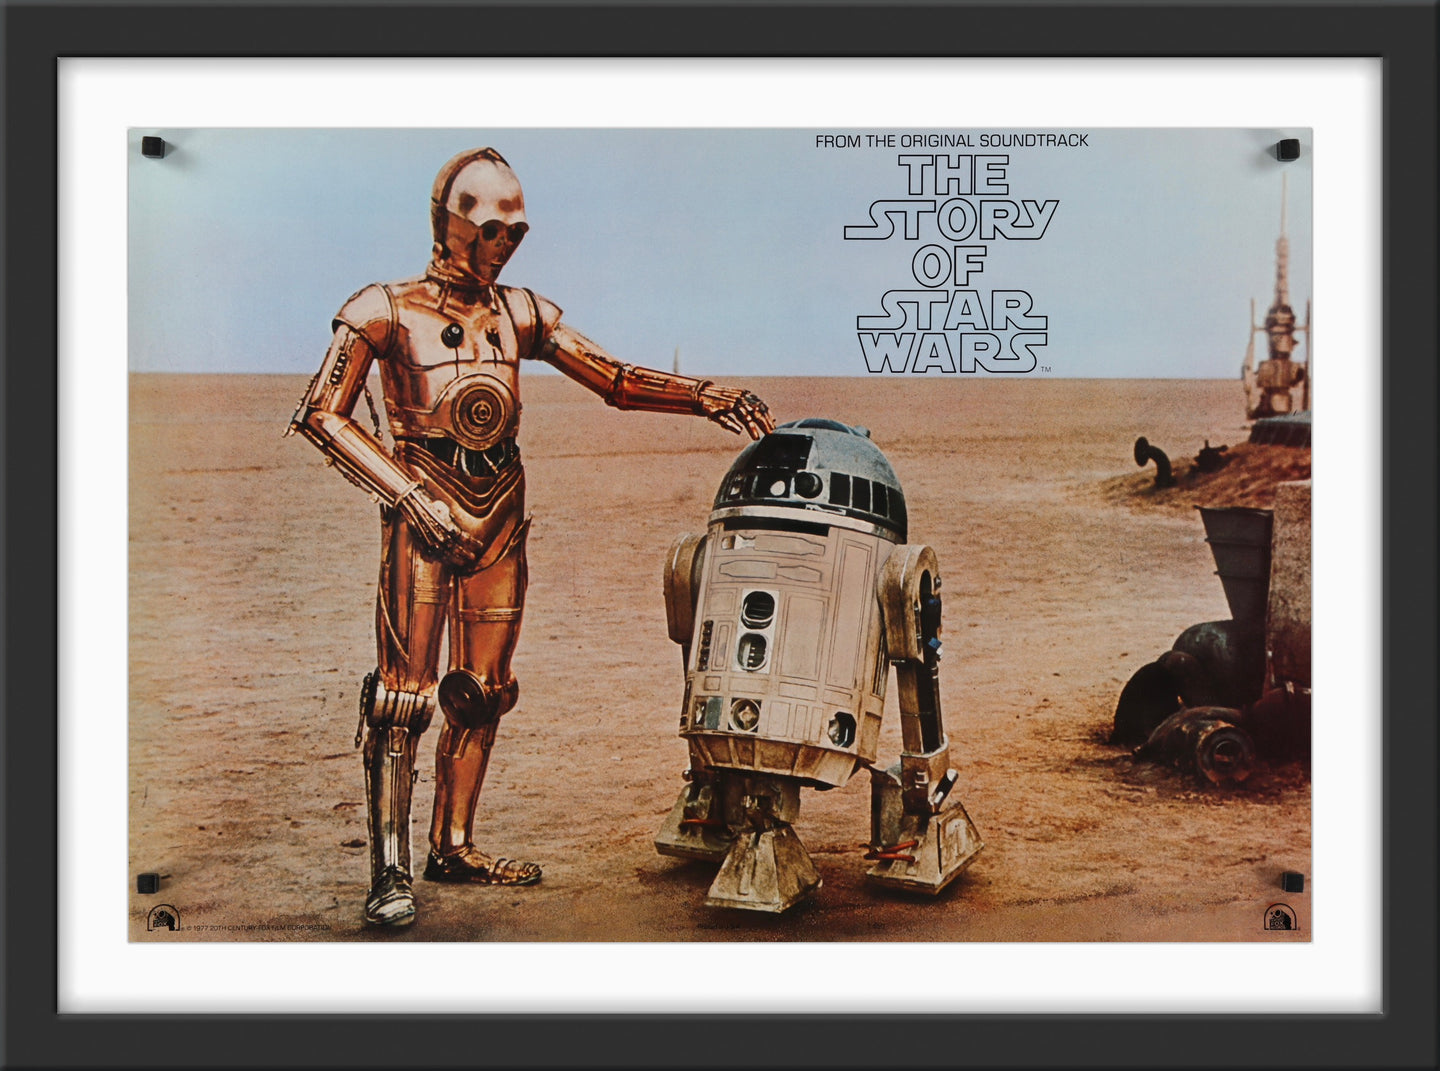 An original sound track poster for The Story of Star Wars